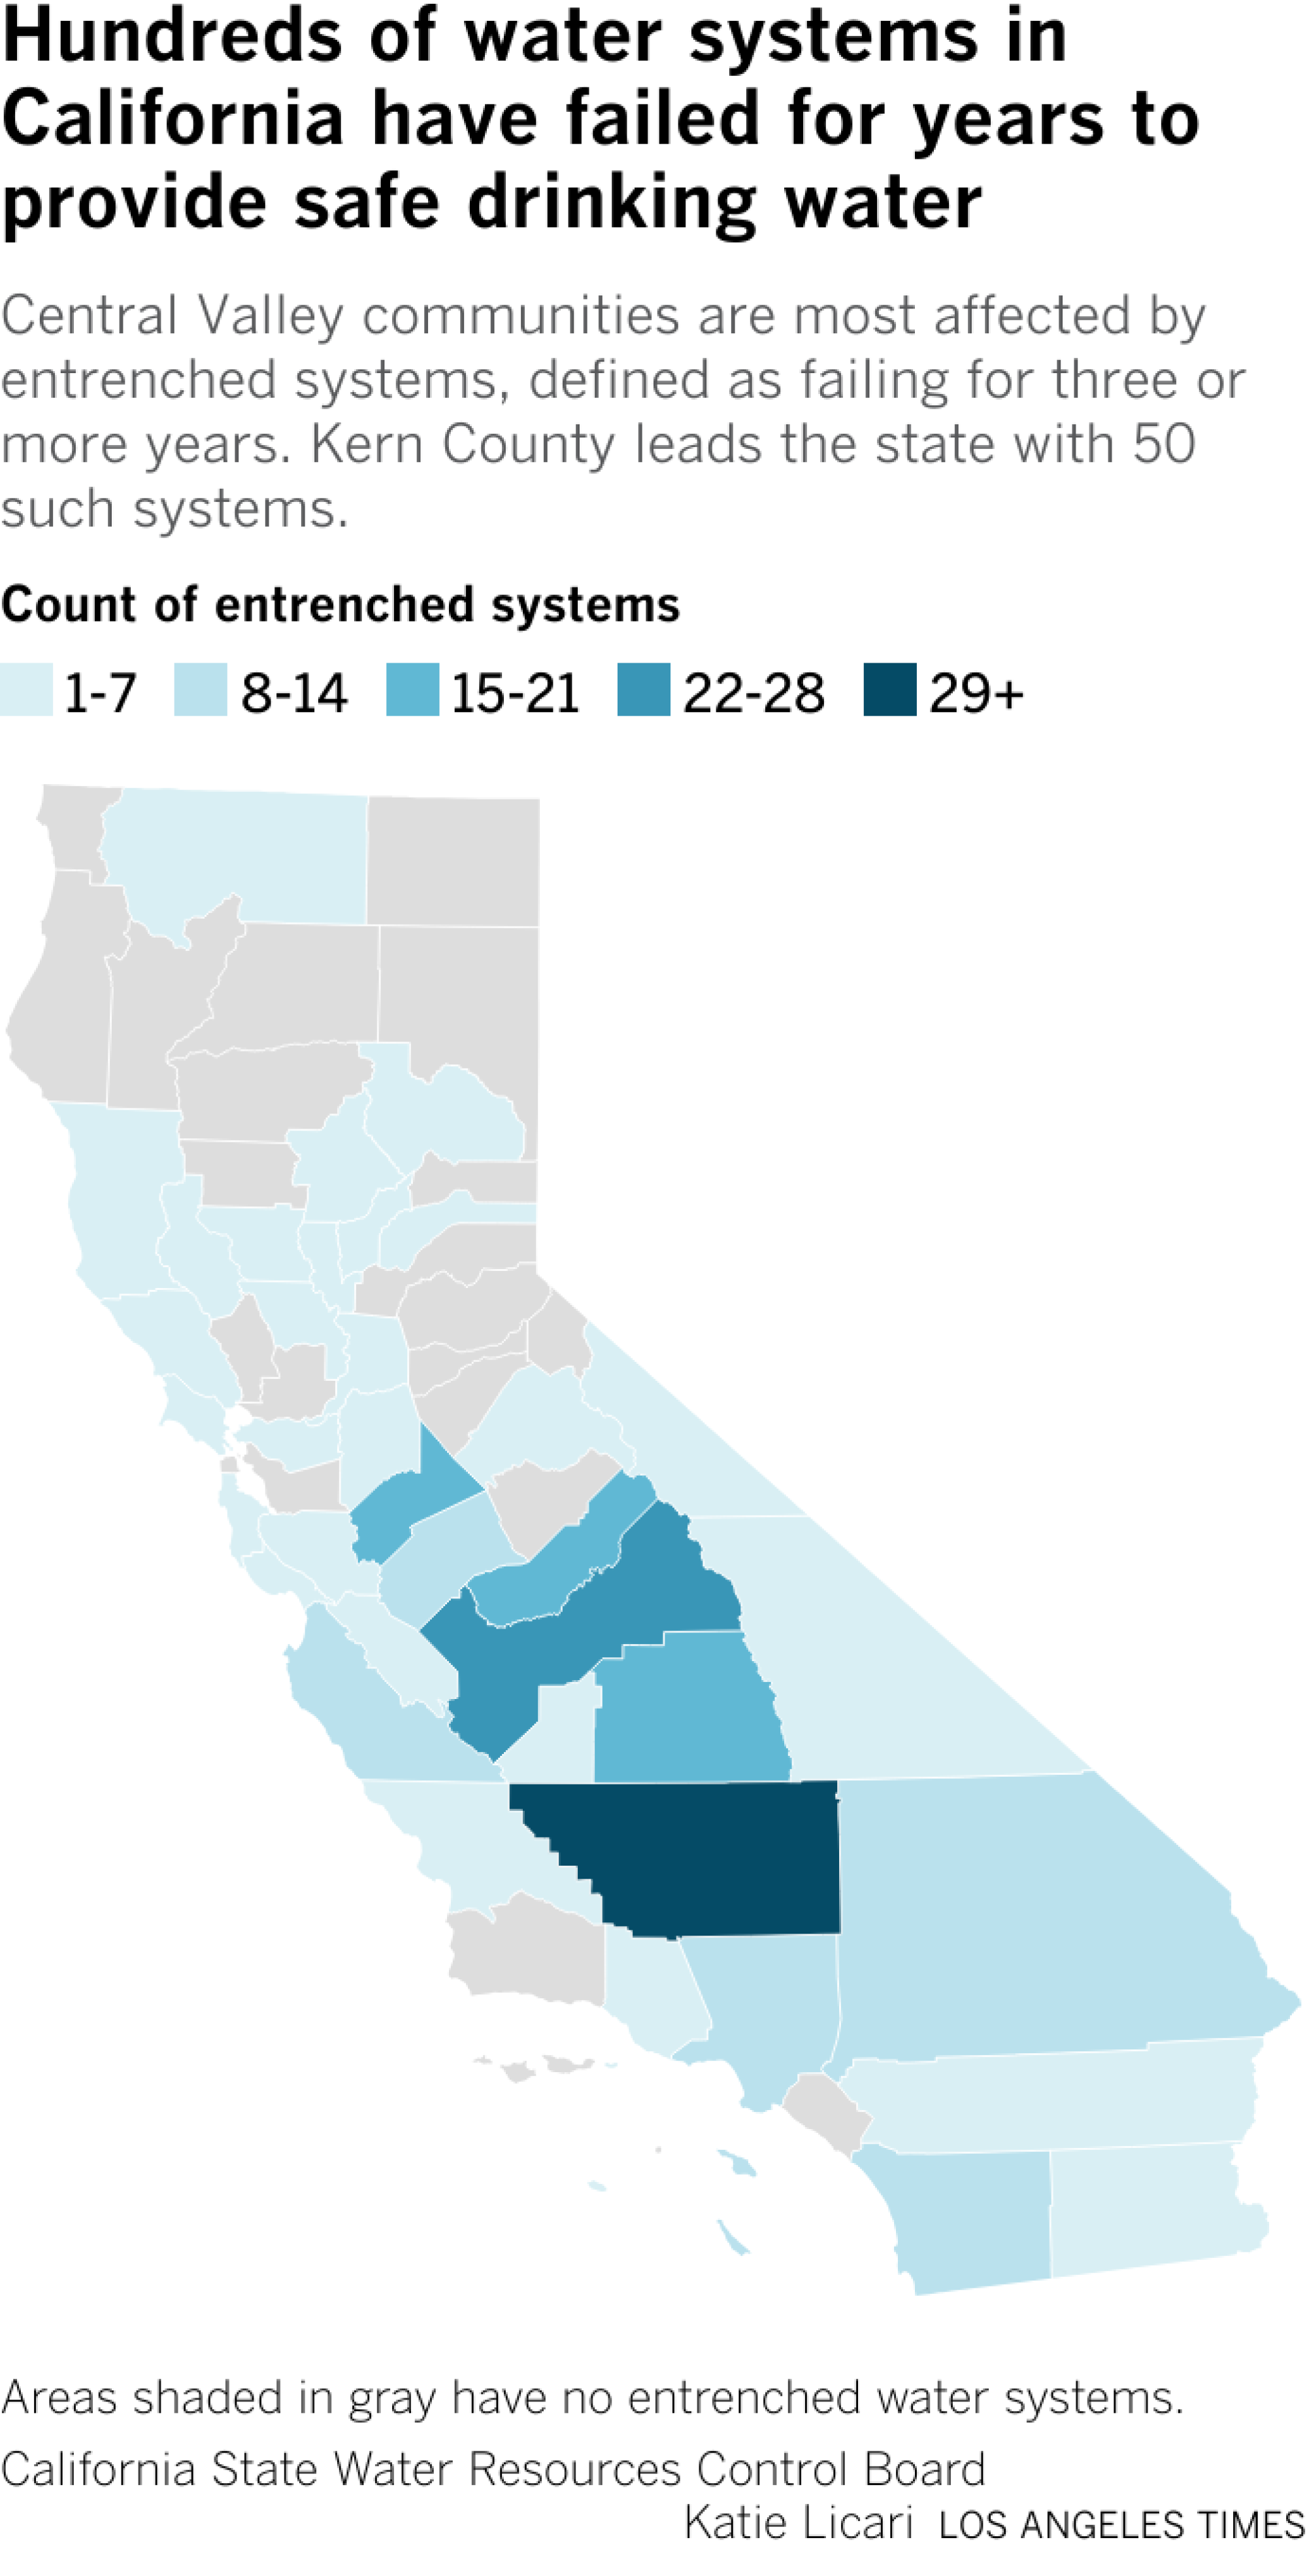 This is a map of entrenched failing water systems in California. Kern County has the most with 50 failing systems. Next is Fresno with 26 and Tulare with 21 failing systems.